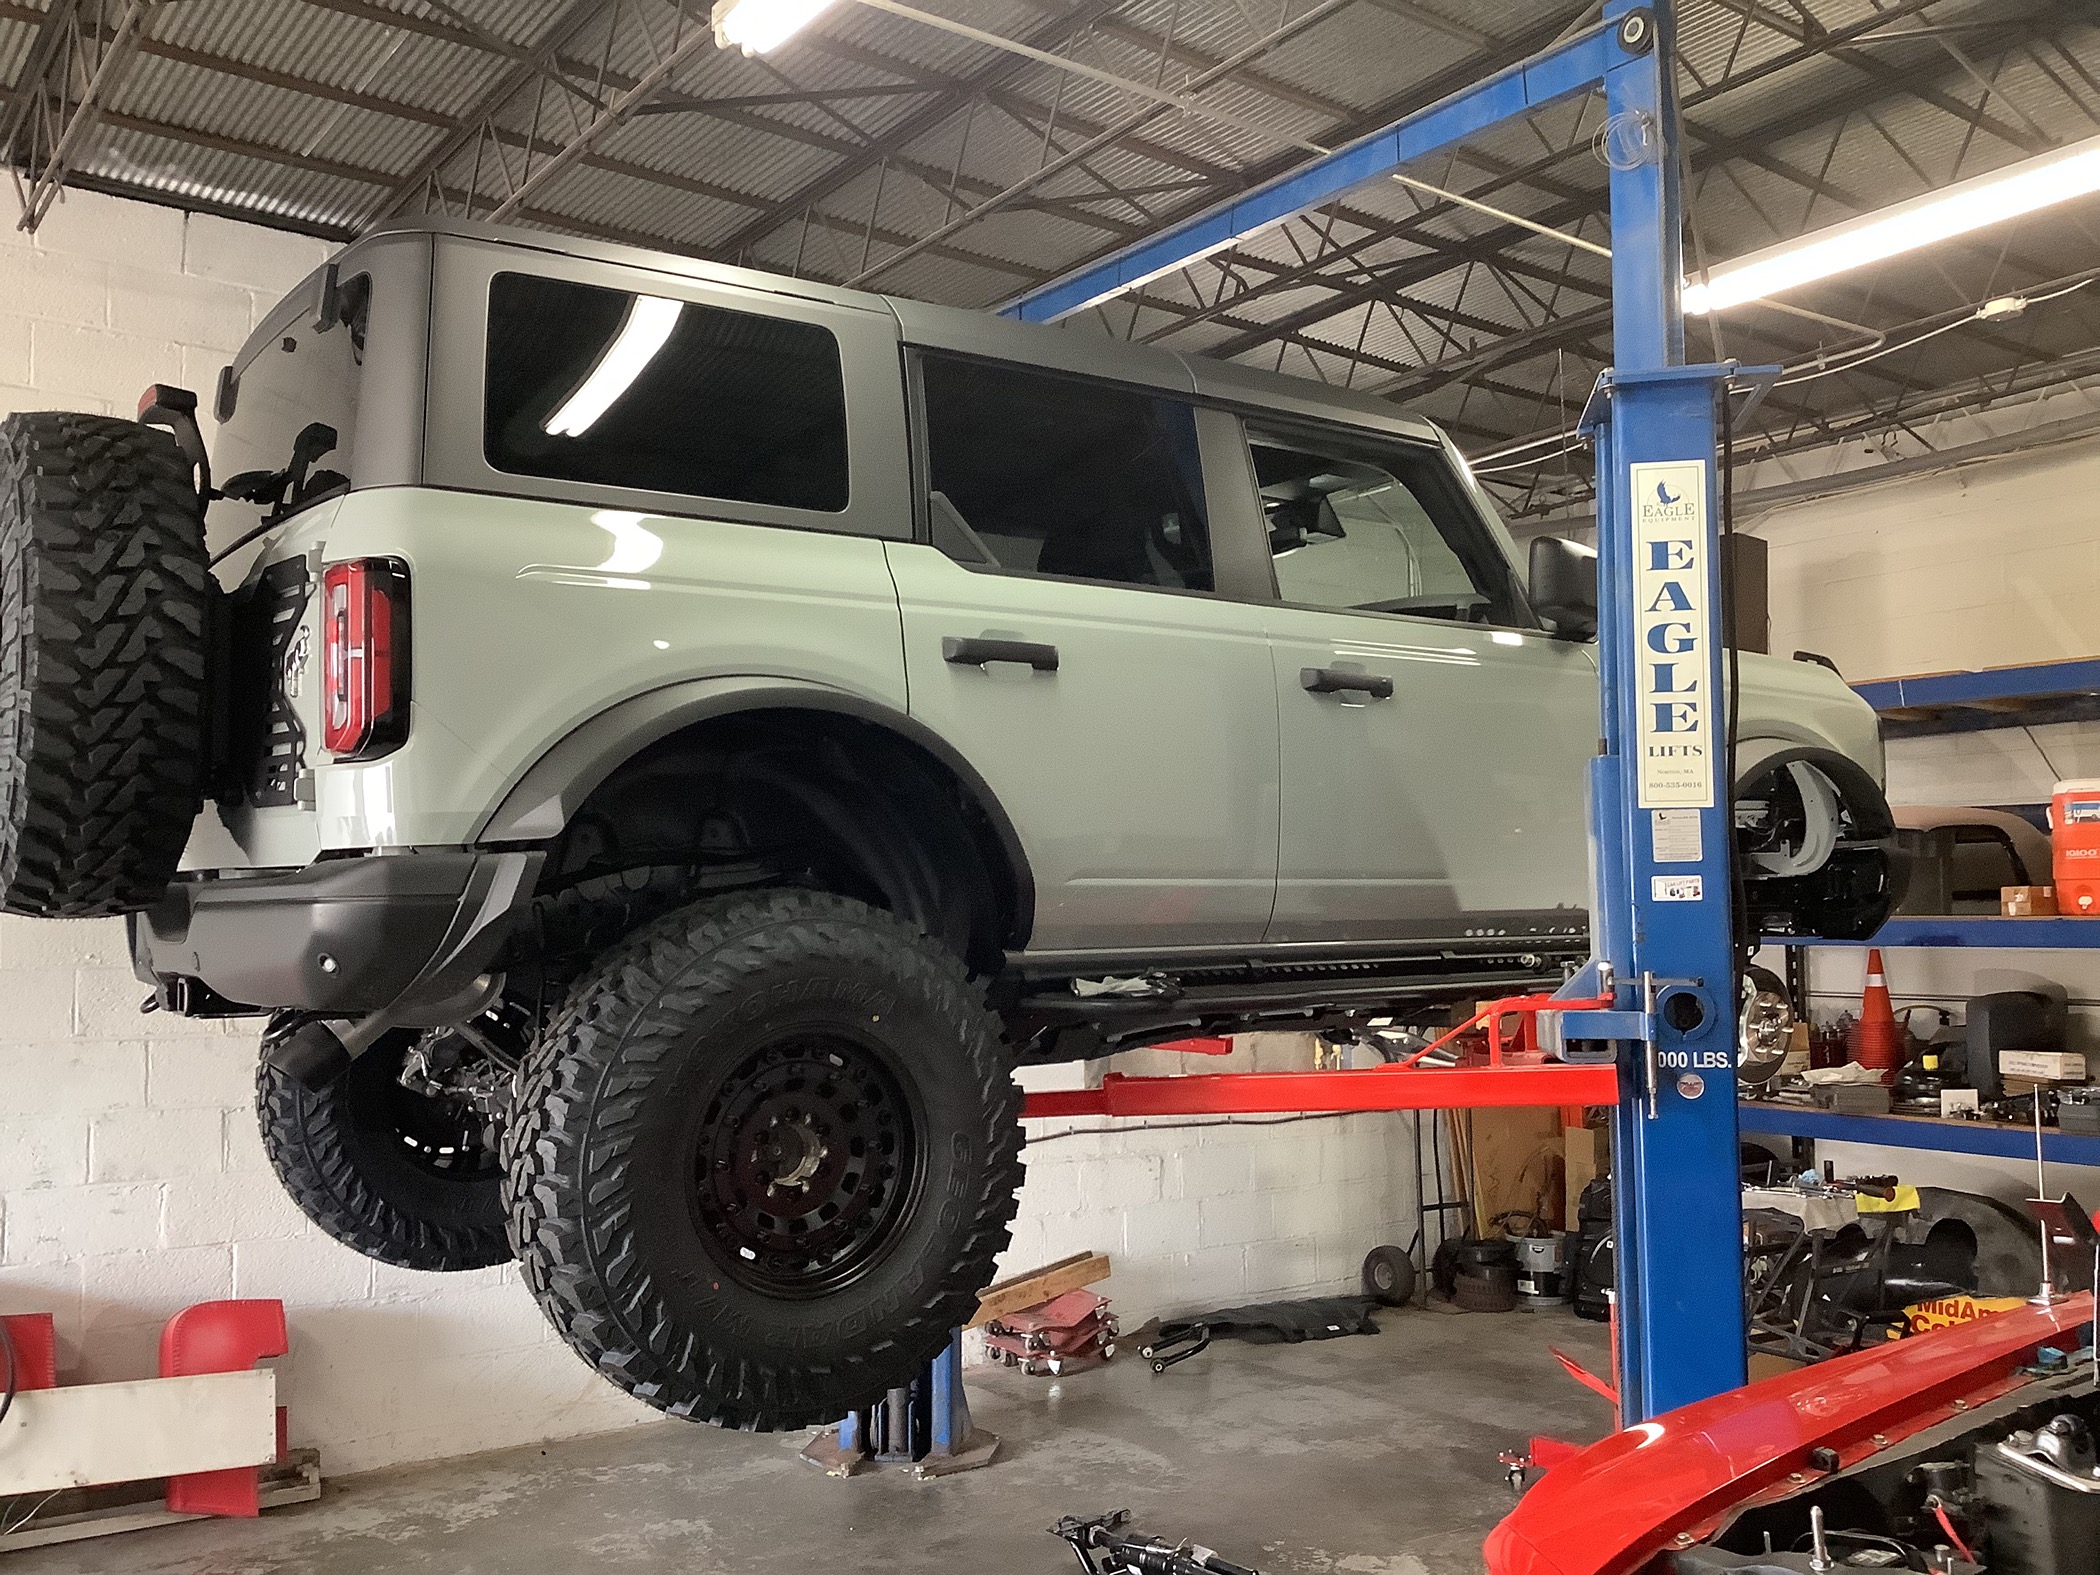 Ford Bronco What upgrades needed to run 37” tires on a Badlands Sasquatch Bronco? 7234F9E7-7822-4A2C-9D15-275A0B345B05